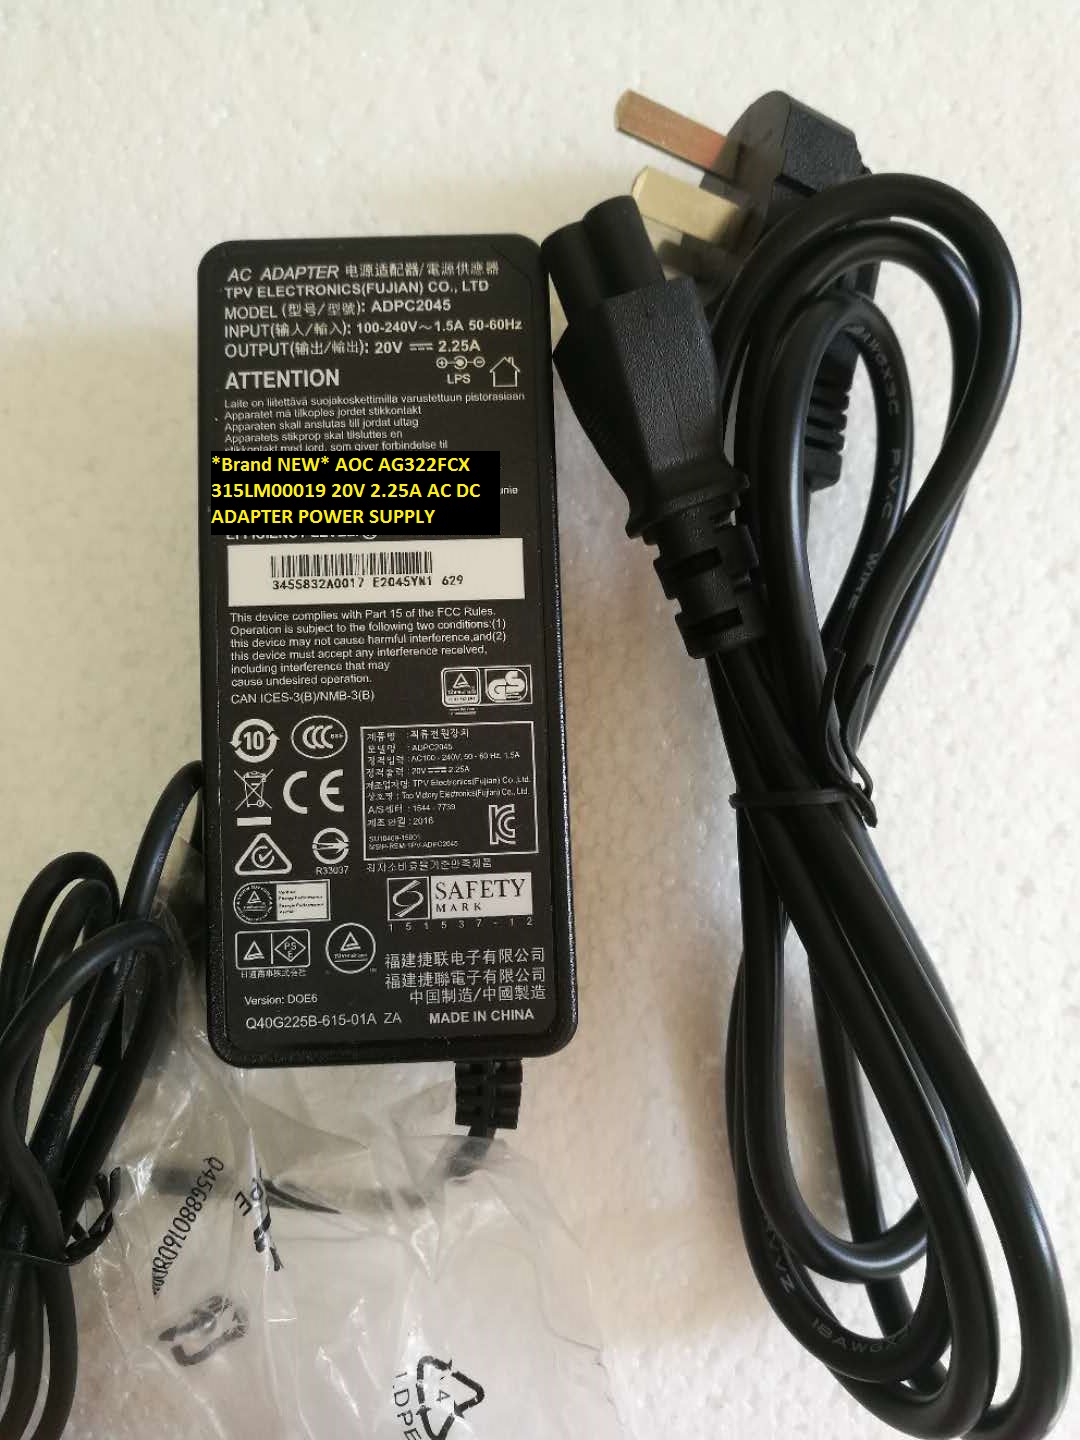 *Brand NEW* AOC AG322FCX 315LM00019 20V 2.25A AC DC ADAPTER POWER SUPPLY